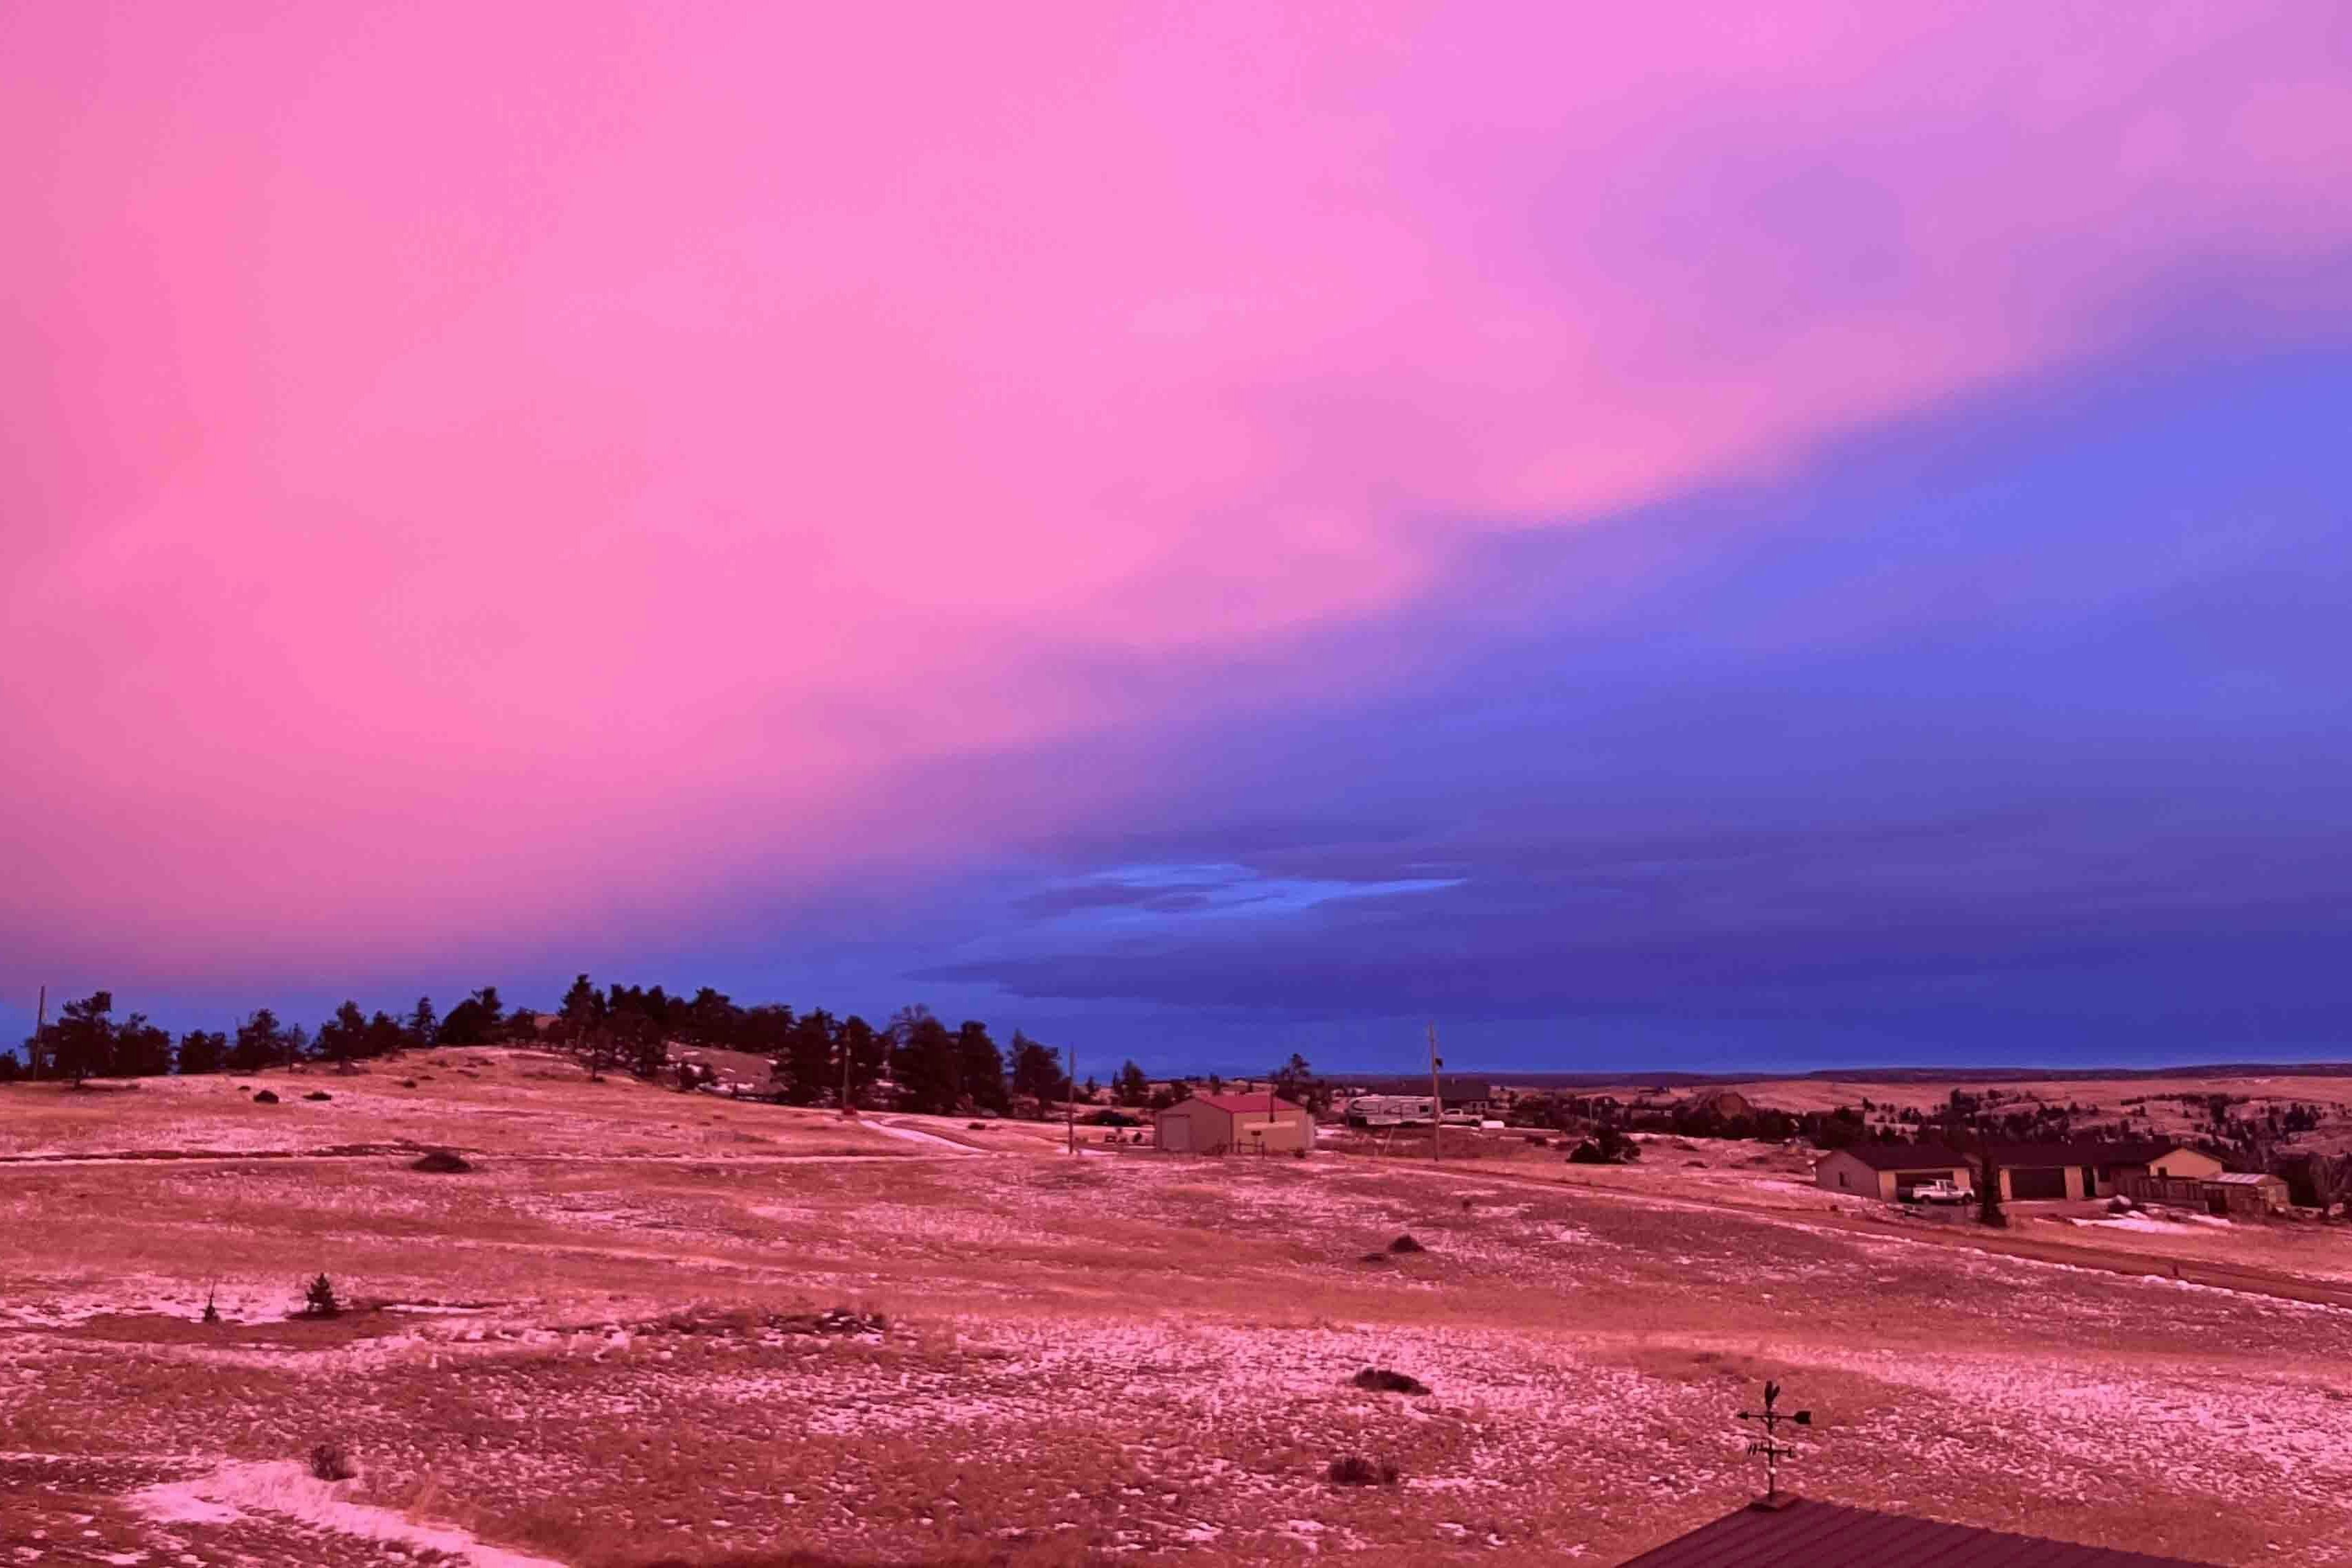 Surreal colors this morning, storm approaching at sunrise at 7am on Dec 4. Mountain Meadow, Cheyenne